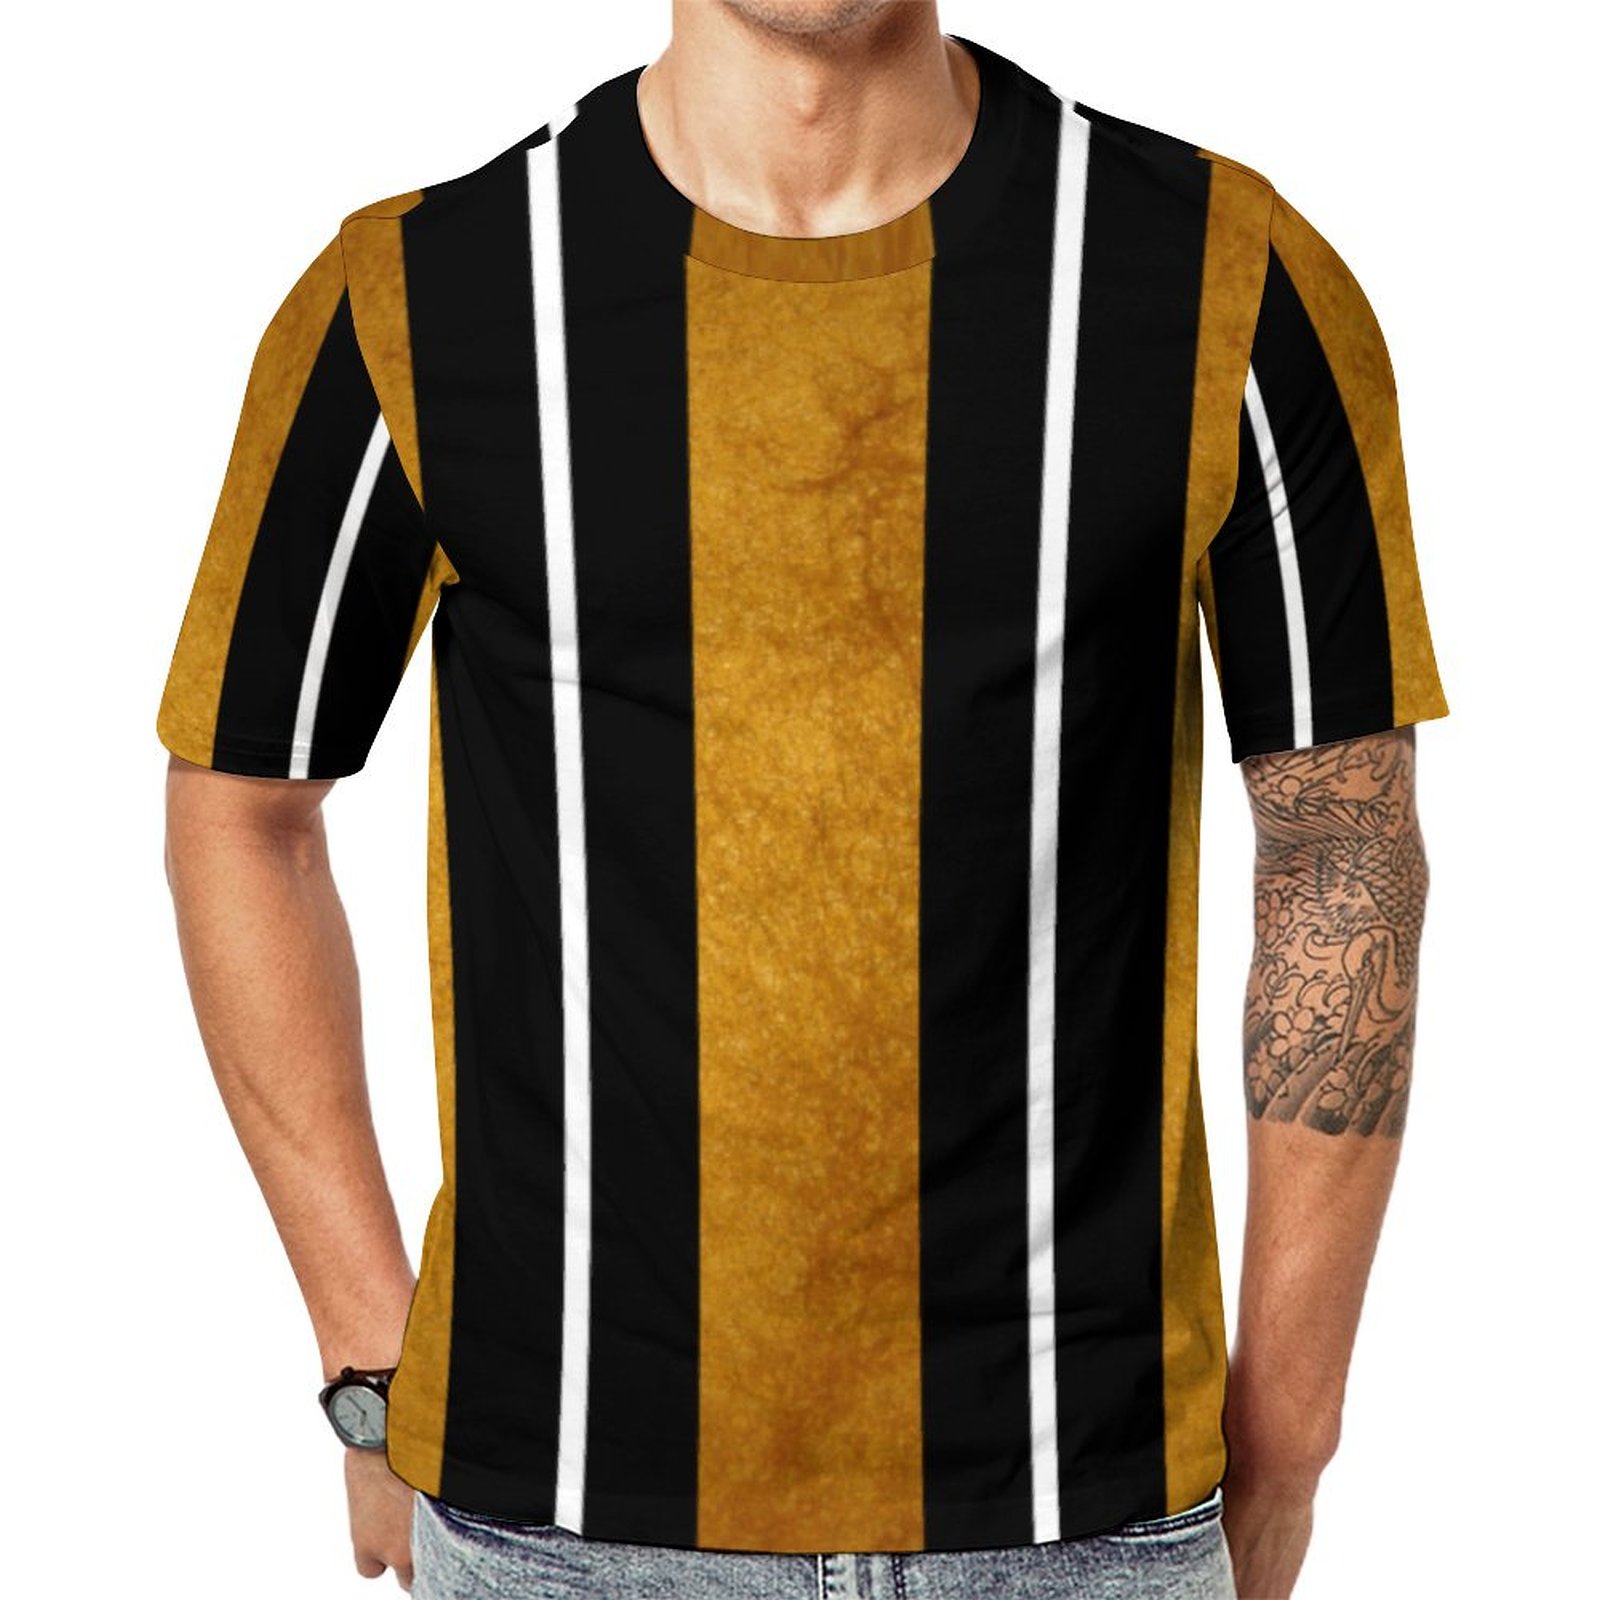 Living Room Black White And Gold Striped Short Sleeve Print Unisex Tshirt Summer Casual Tees for Men and Women Coolcoshirts